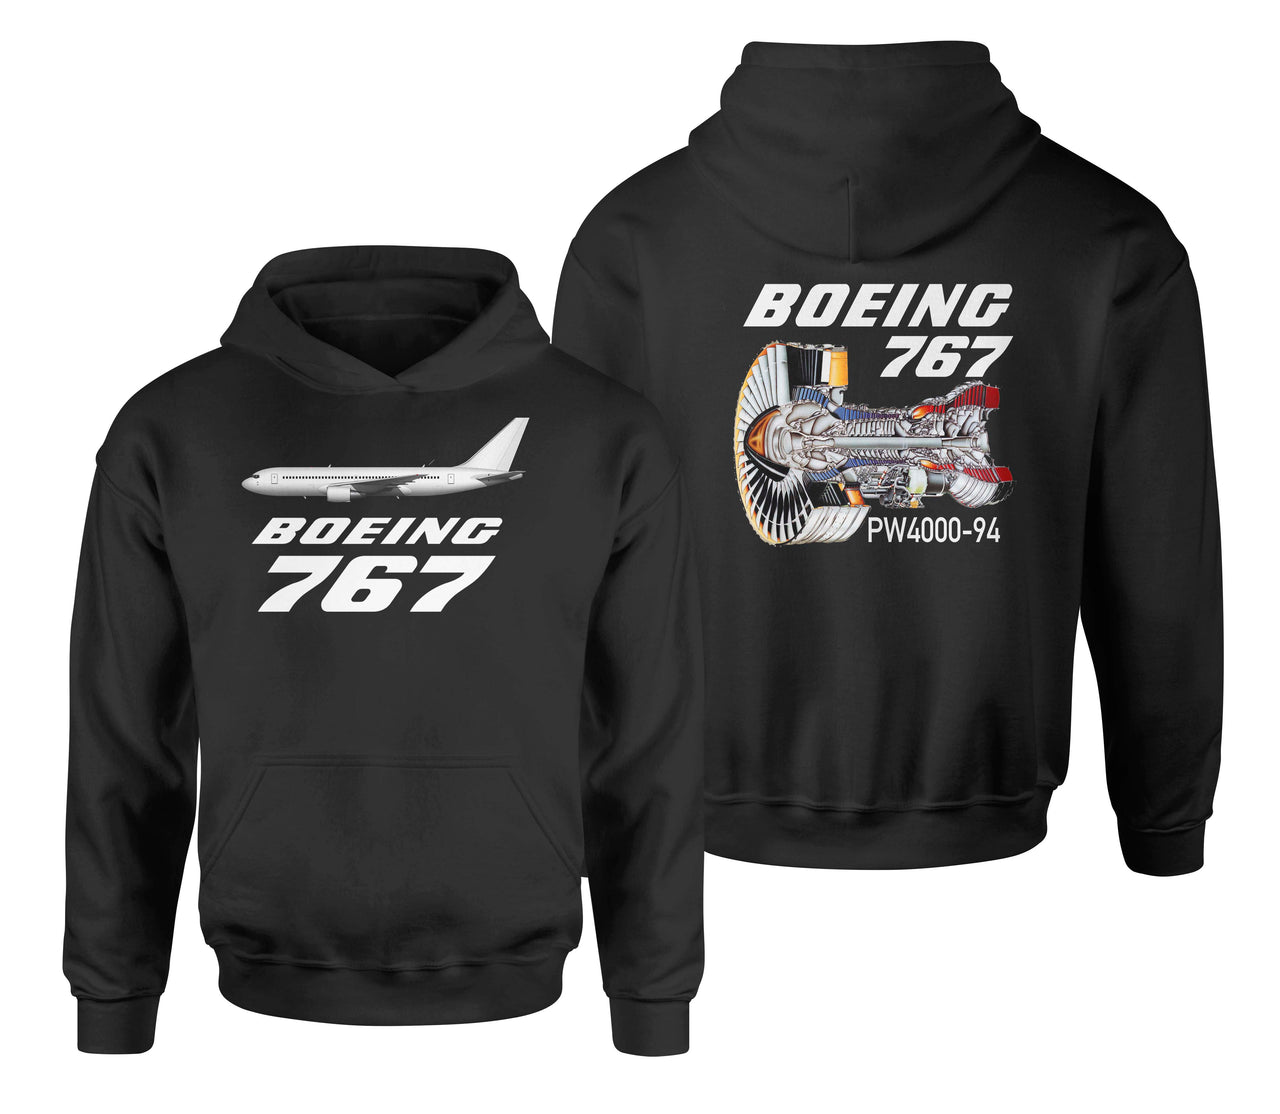 Boeing 767 Engine (PW4000-94) Designed Double Side Hoodies